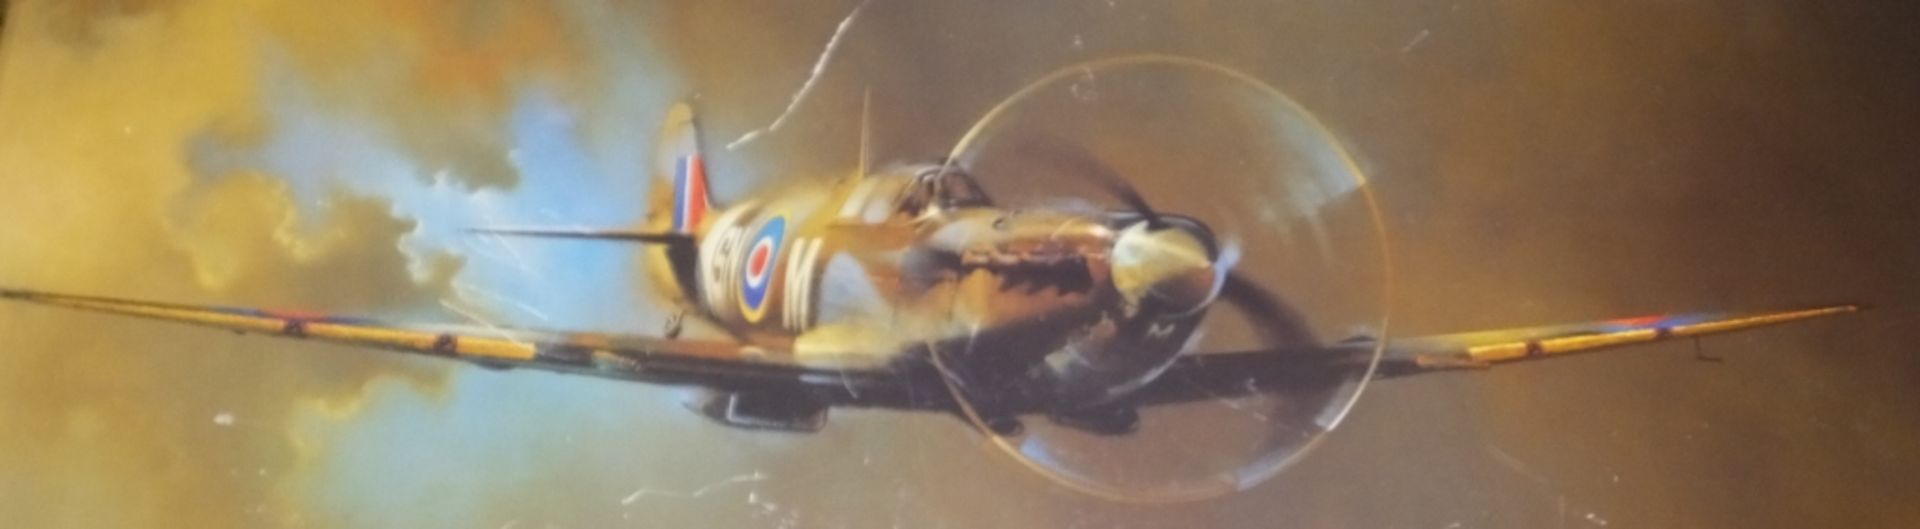 Spitfire Picture - Image 2 of 6